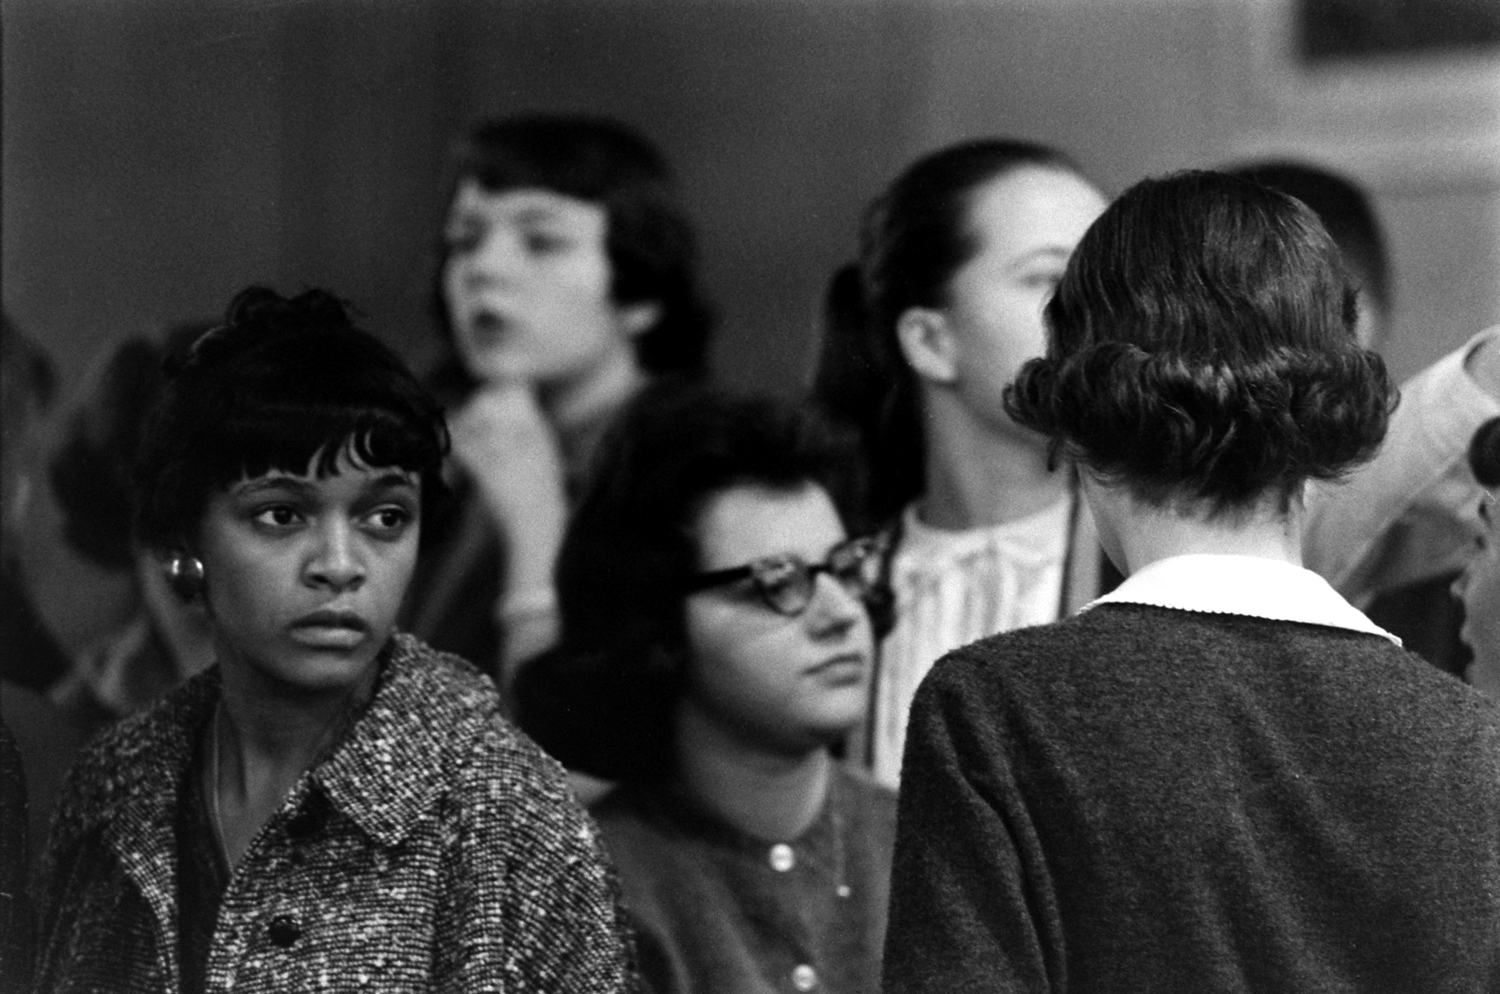 Alone in line, Betty Jean Reed tensely waits for lunch at Granby High cafeteria as other students ignore her.